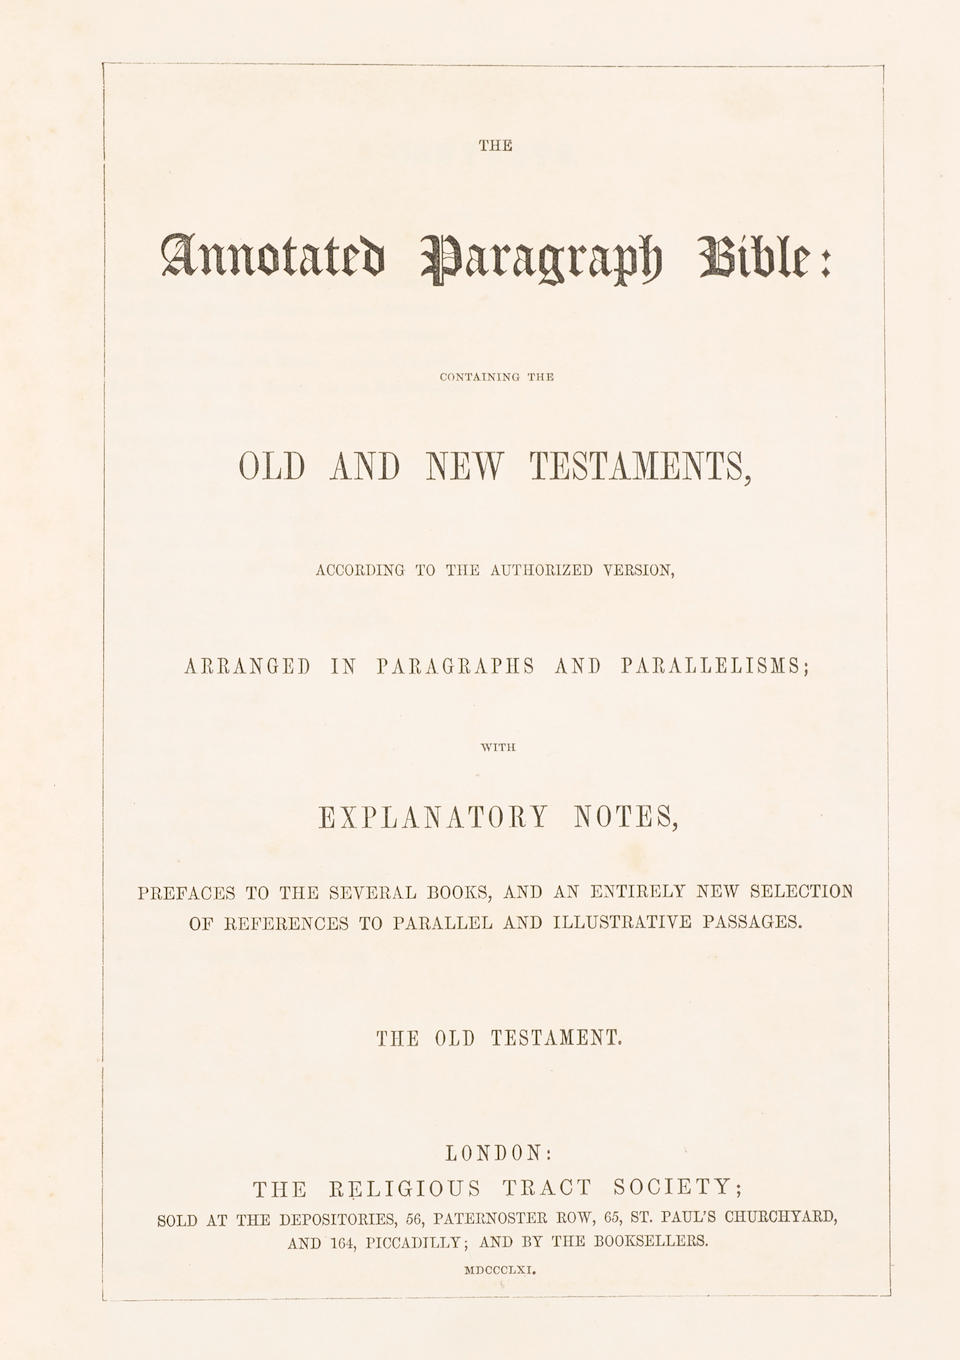 INAUGURAL BIBLE OF ULYSSES S. GRANT, 1869. [GRANT, ULYSSES S. 1822-1885.] The Annotated Paragraph Bible: containing the Old and New Testaments, according to the Authorized Version, arranged in Paragraphs and Parallelisms; with Explanatory Notes. London: The Religious Tract Society, 1861.